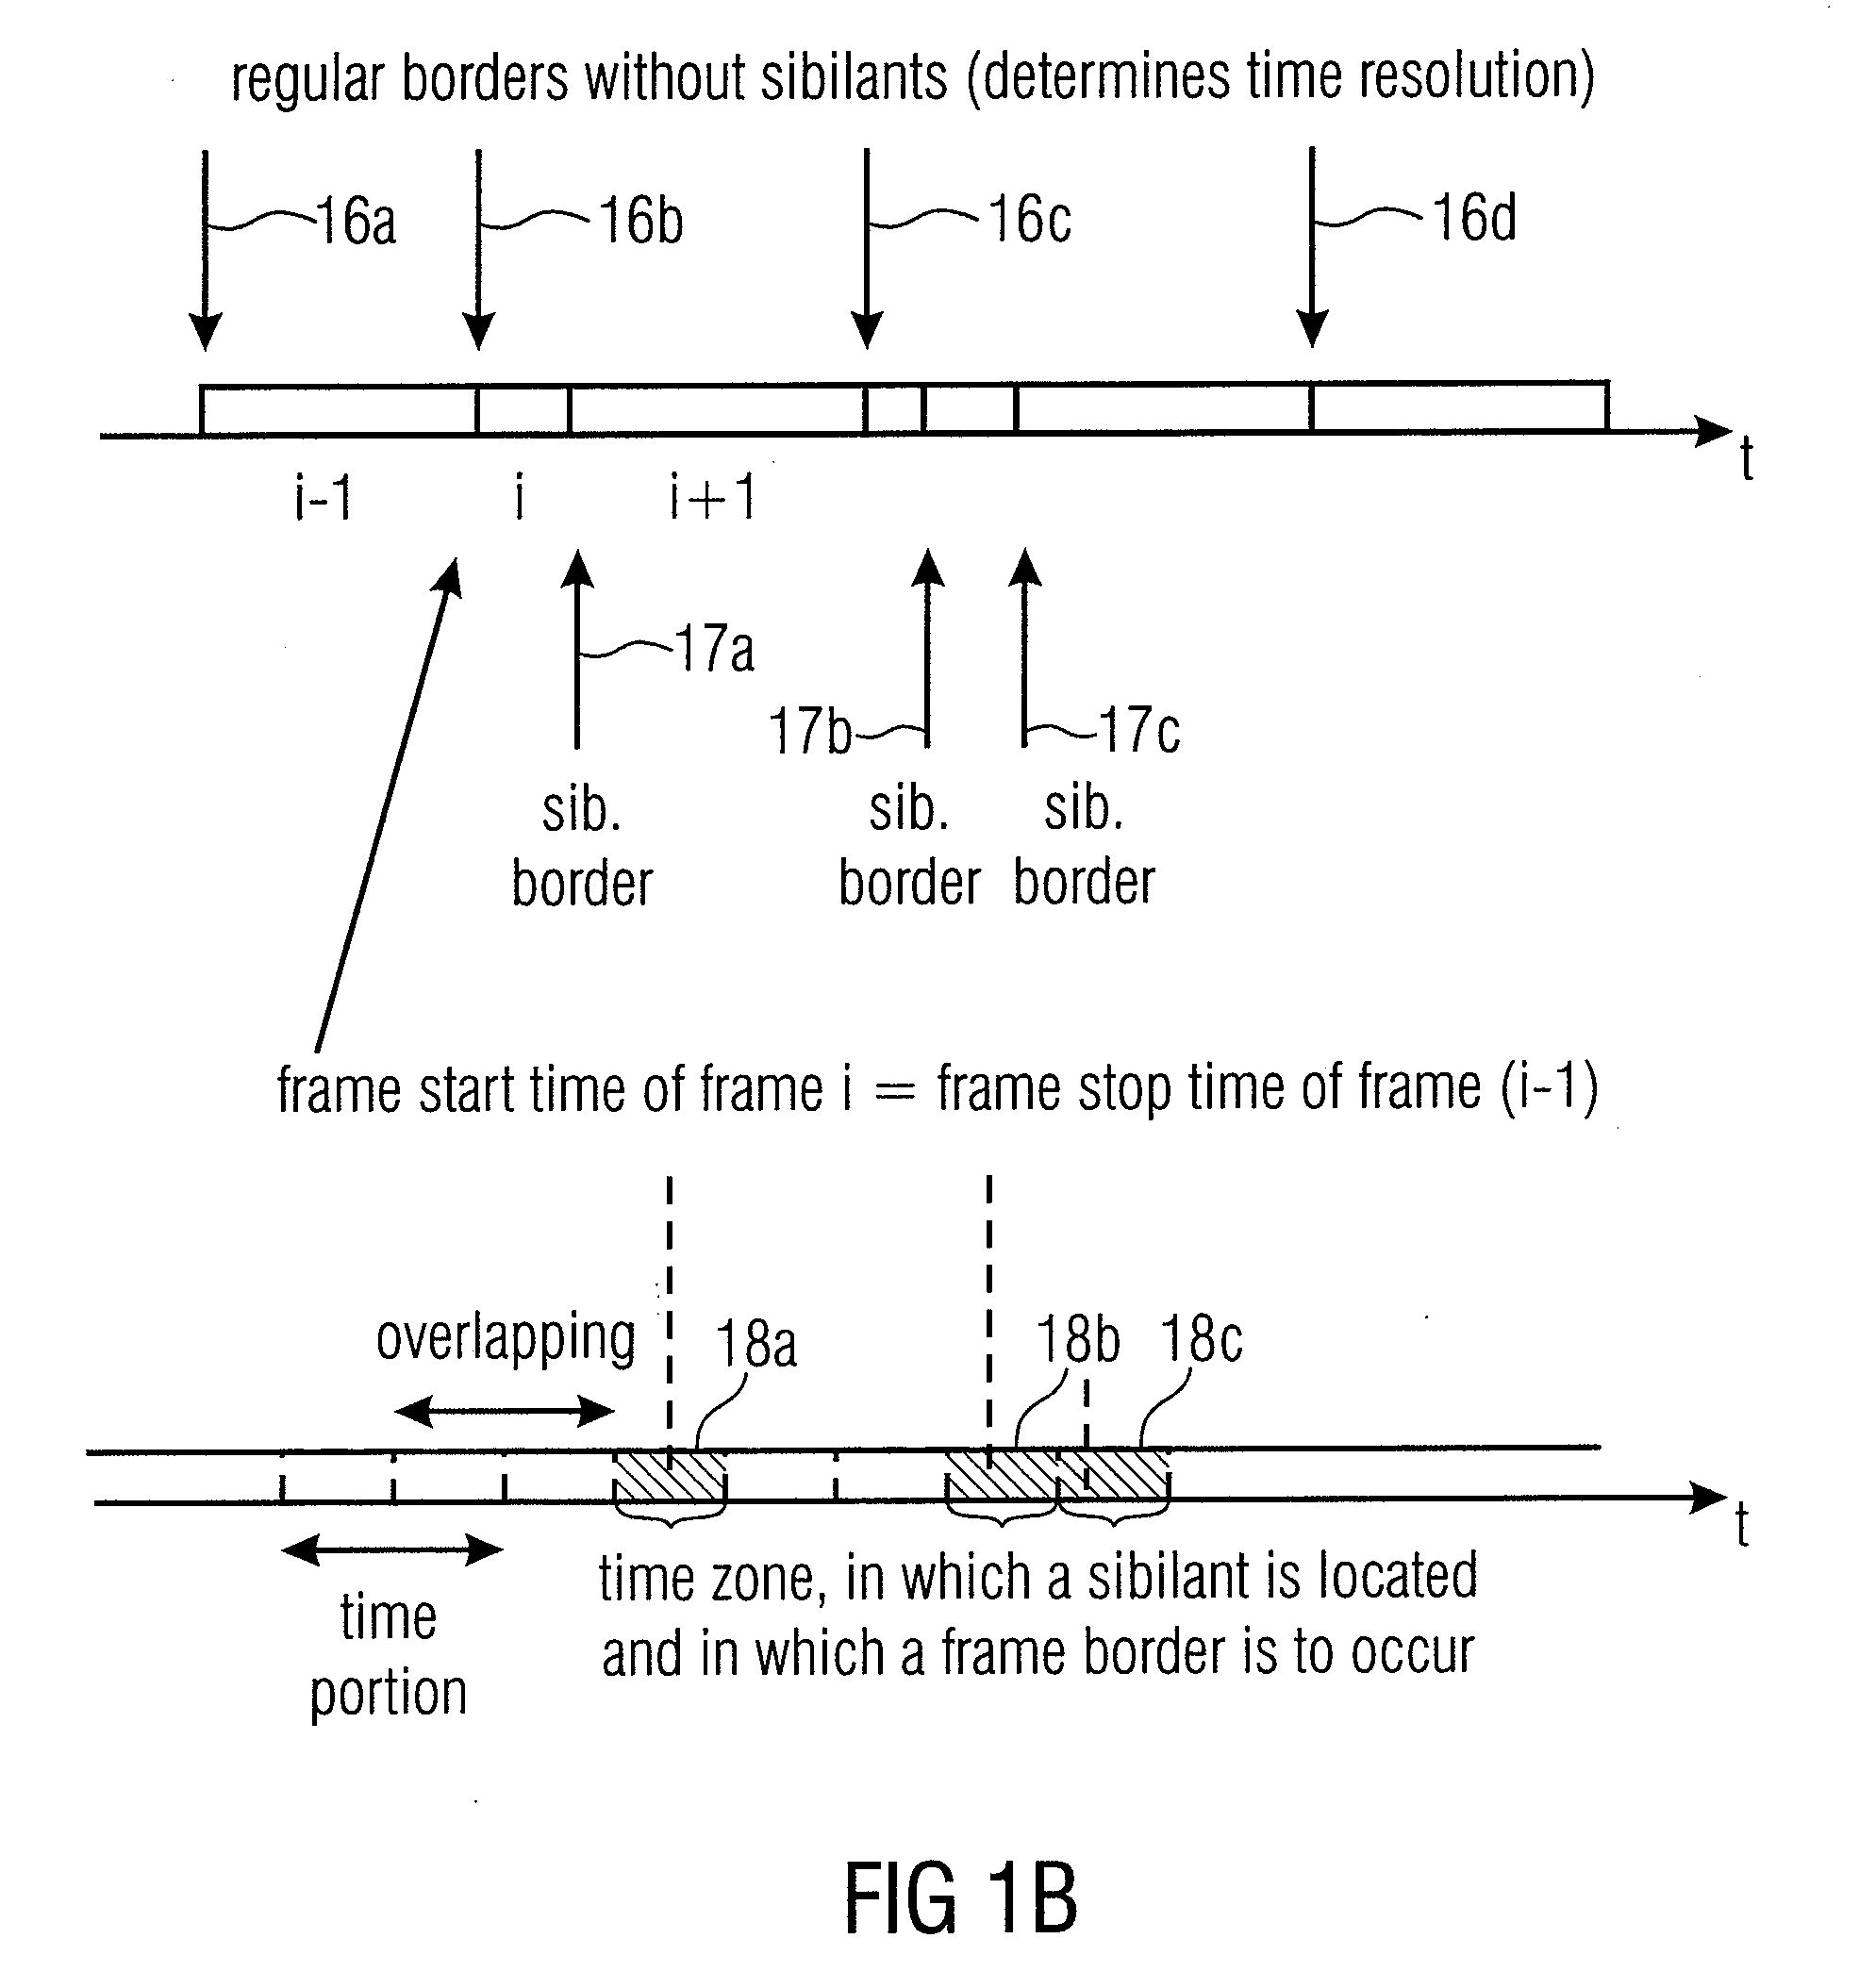 Apparatus and Method for Calculating Bandwidth Extension Data Using a Spectral Tilt Controlled Framing